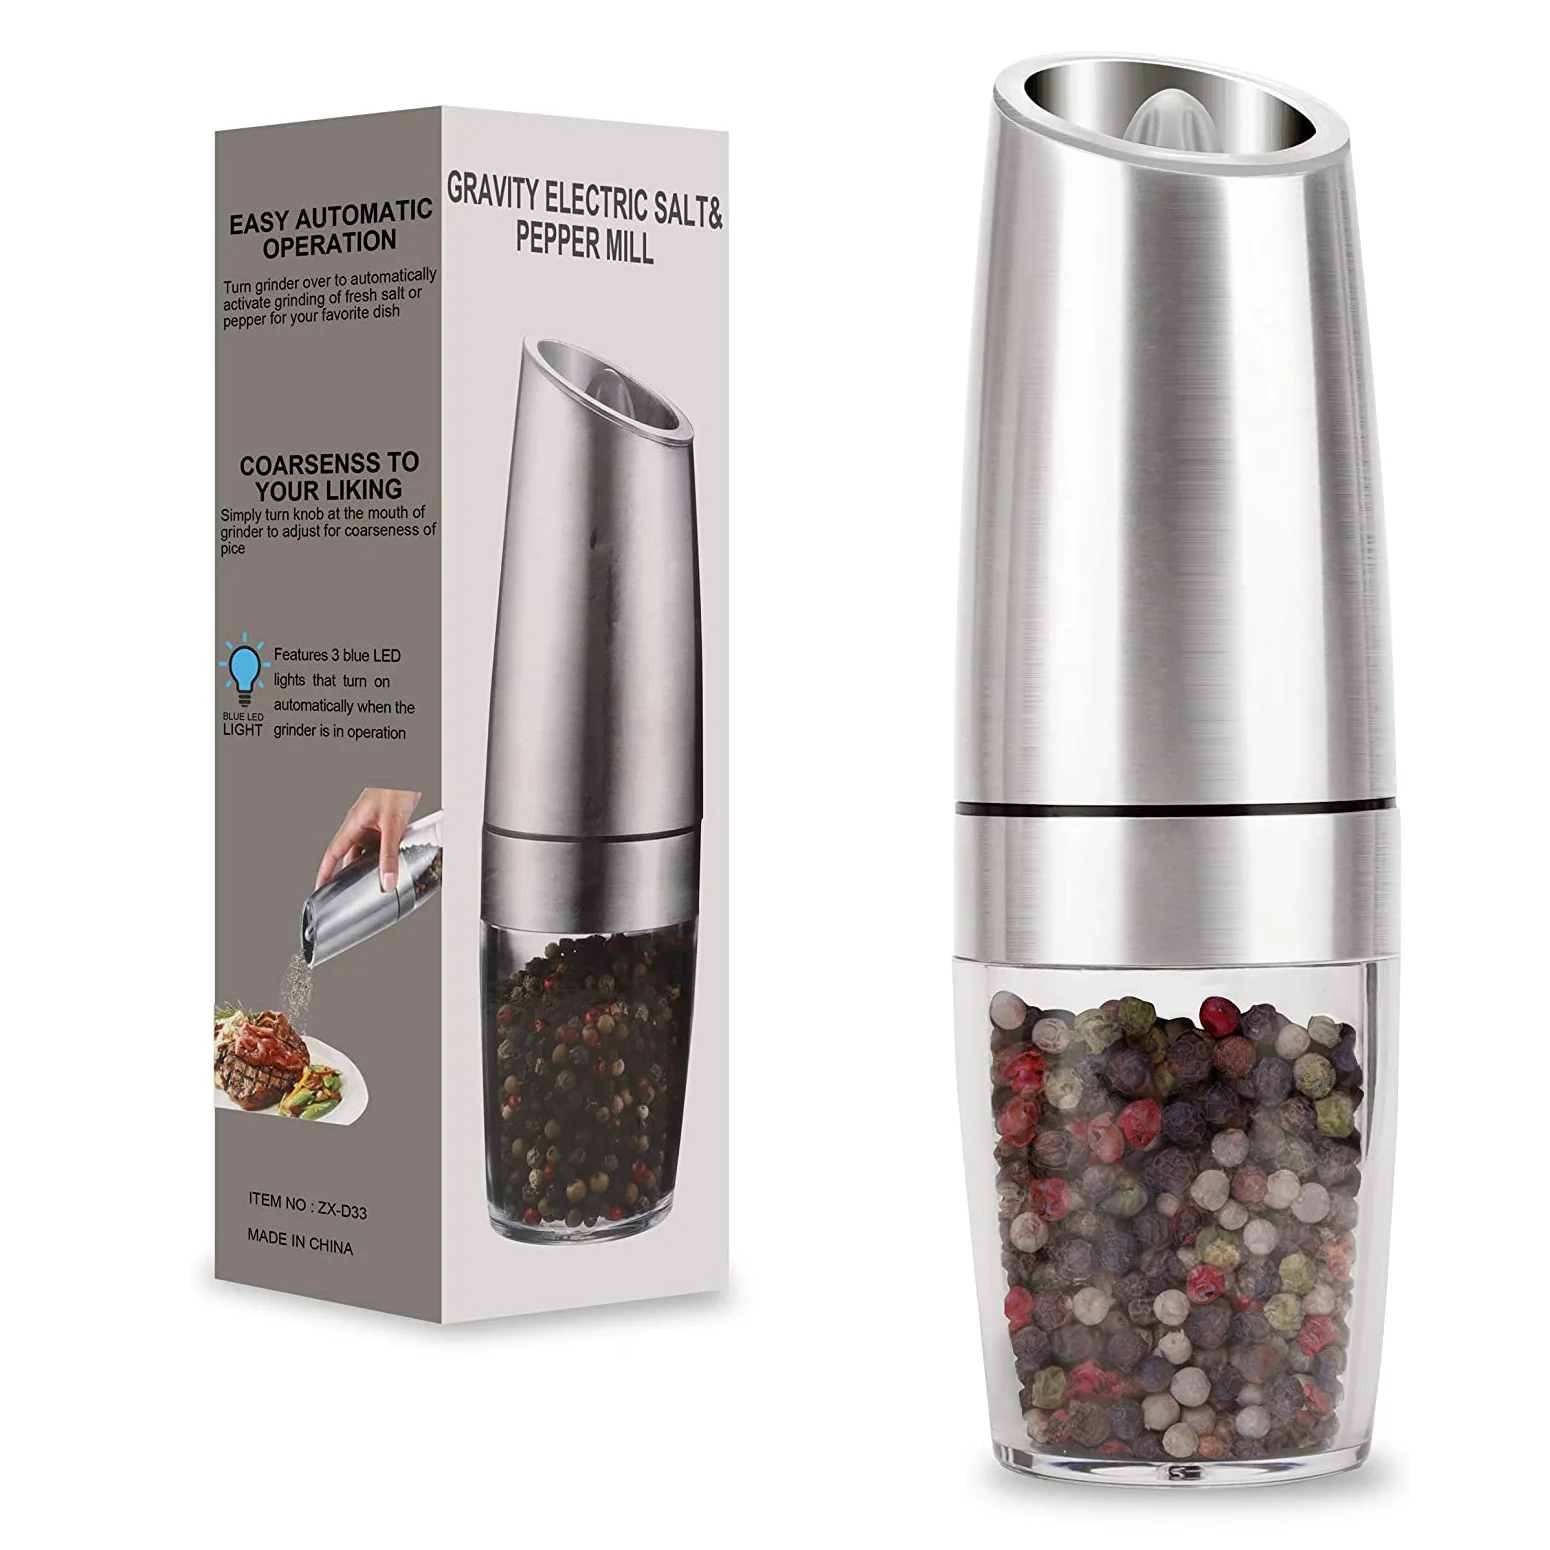 https://ae01.alicdn.com/kf/S457948cbbaf34dc9b660404b9ff63b3fJ/Gravity-Salt-and-Pepper-Mill-Set-Pepper-Grinder-with-Ceramic-Rotor-Acrylic-Container-Stainless-Steel-Middle.jpg